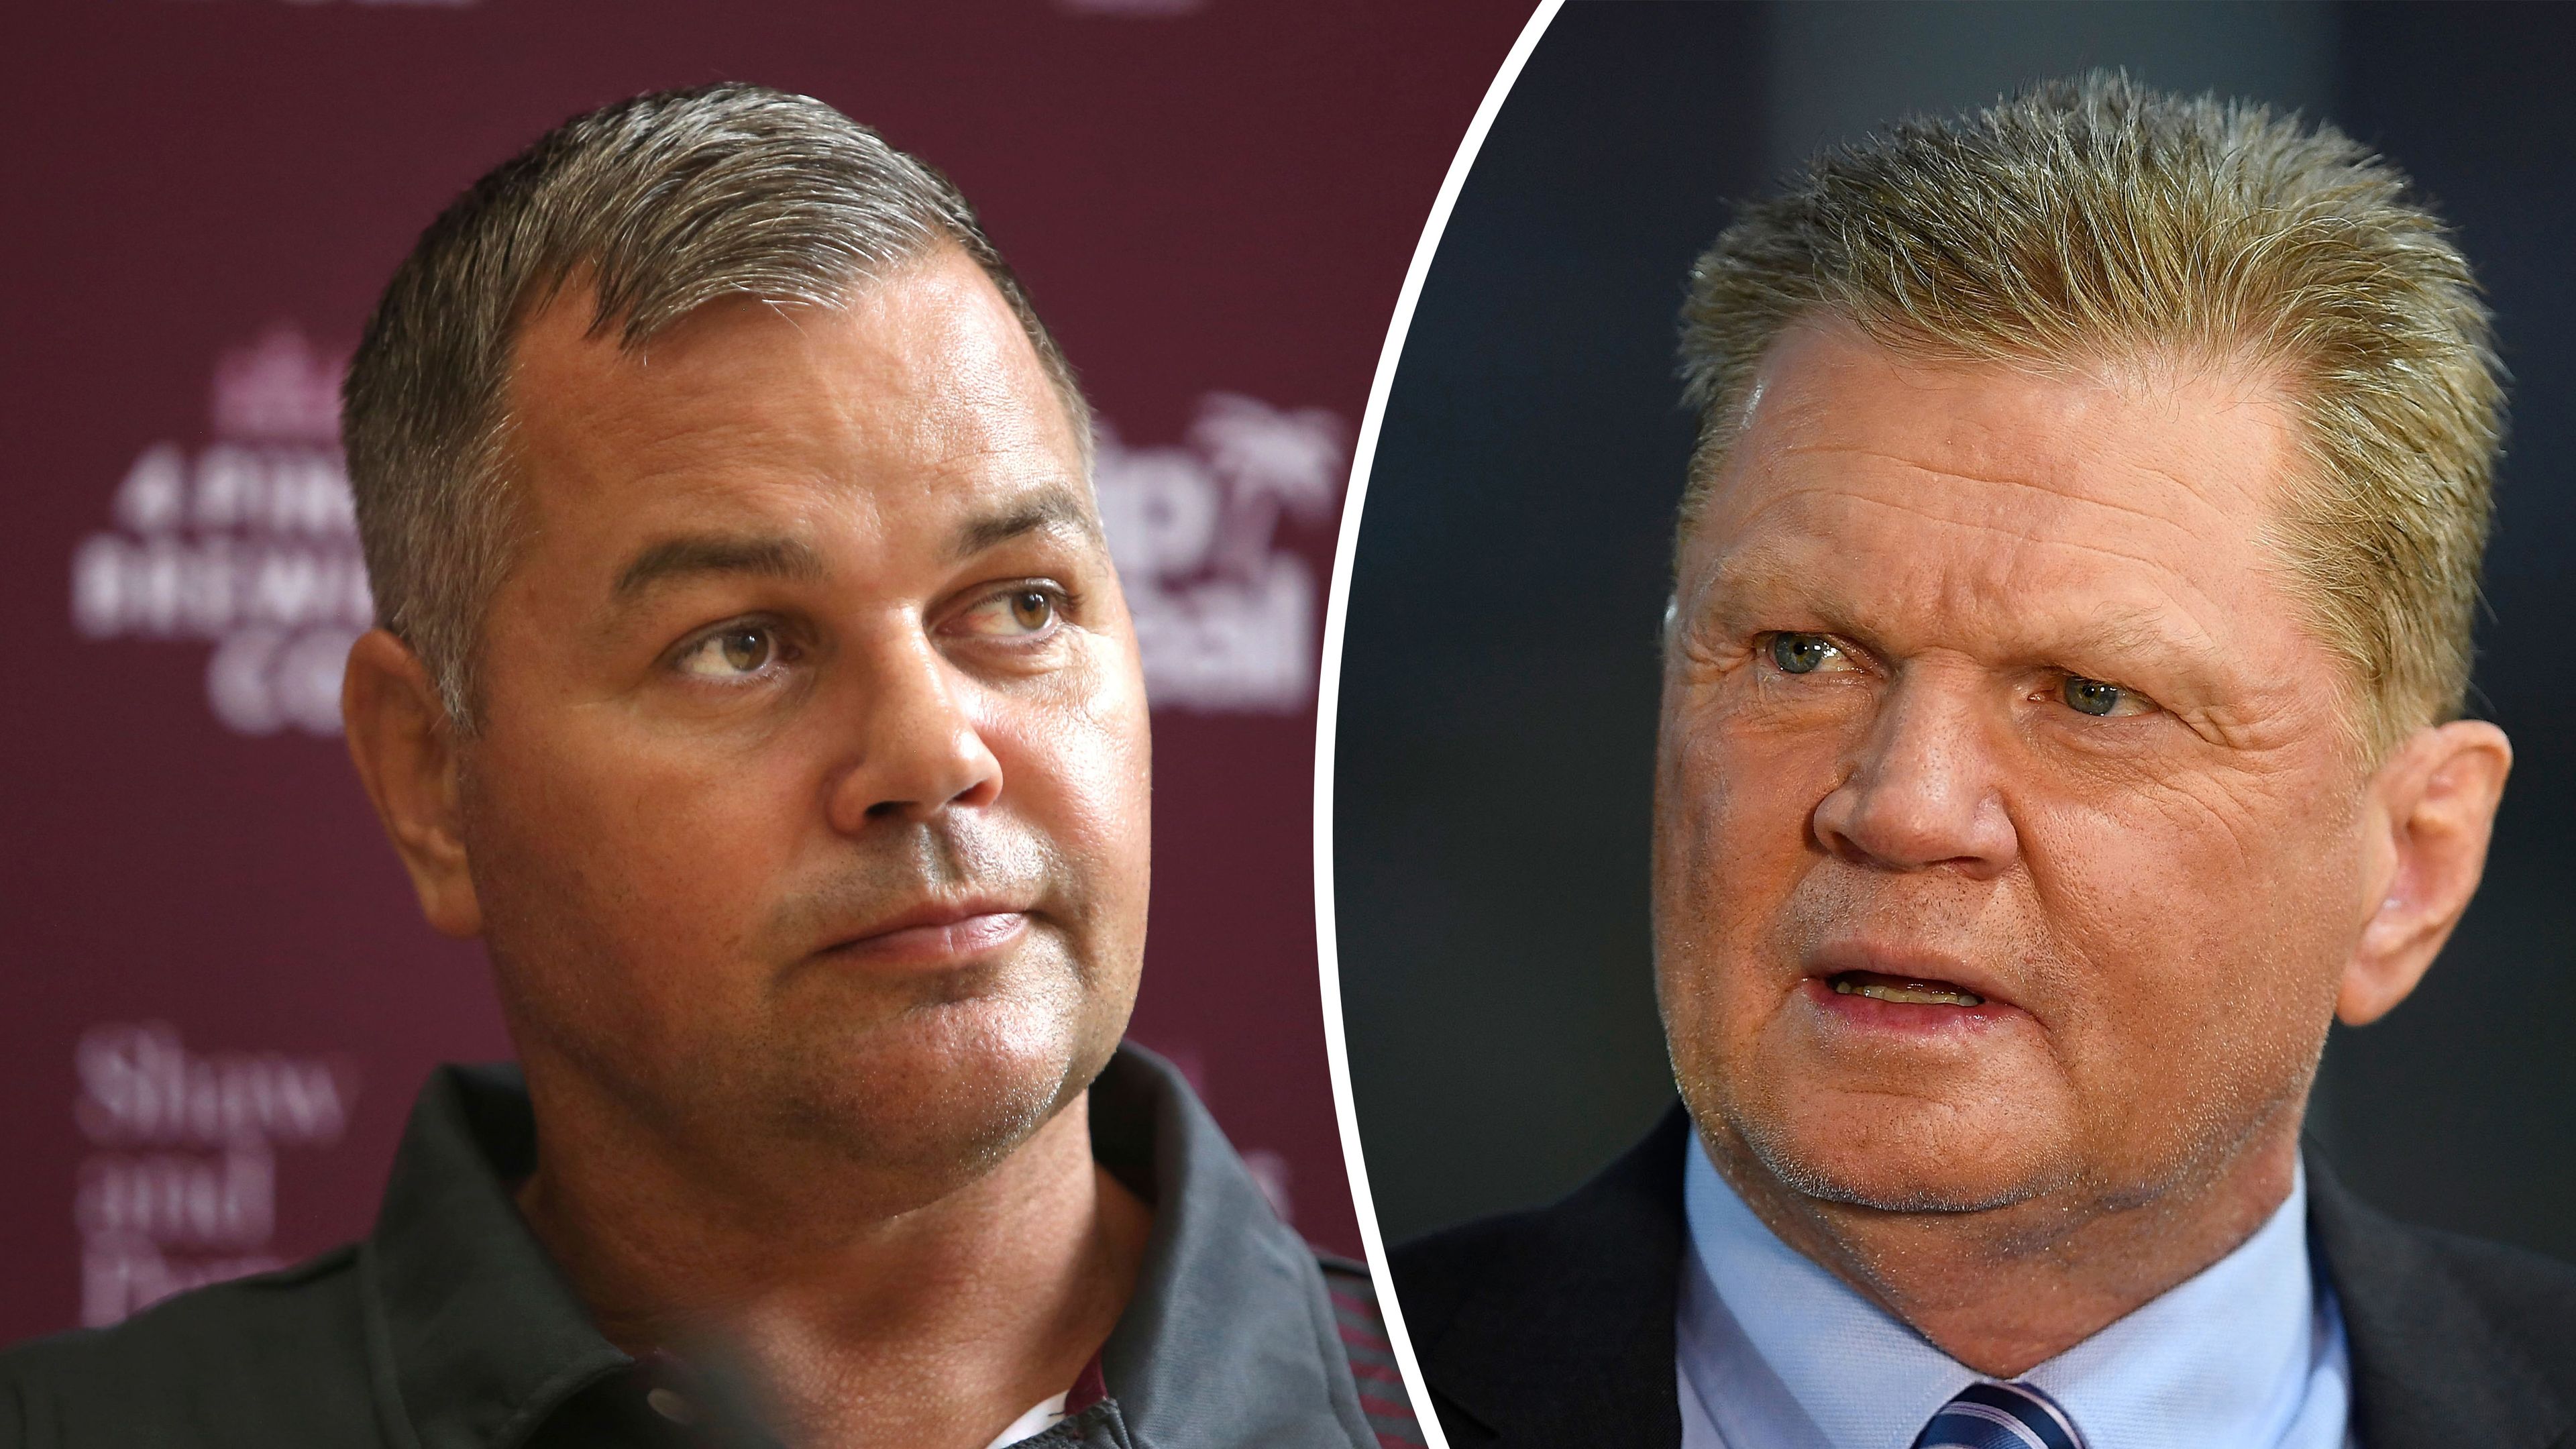 EXCLUSIVE: Manly legend Paul Vautin 'surprised' by Anthony Seibold appointment